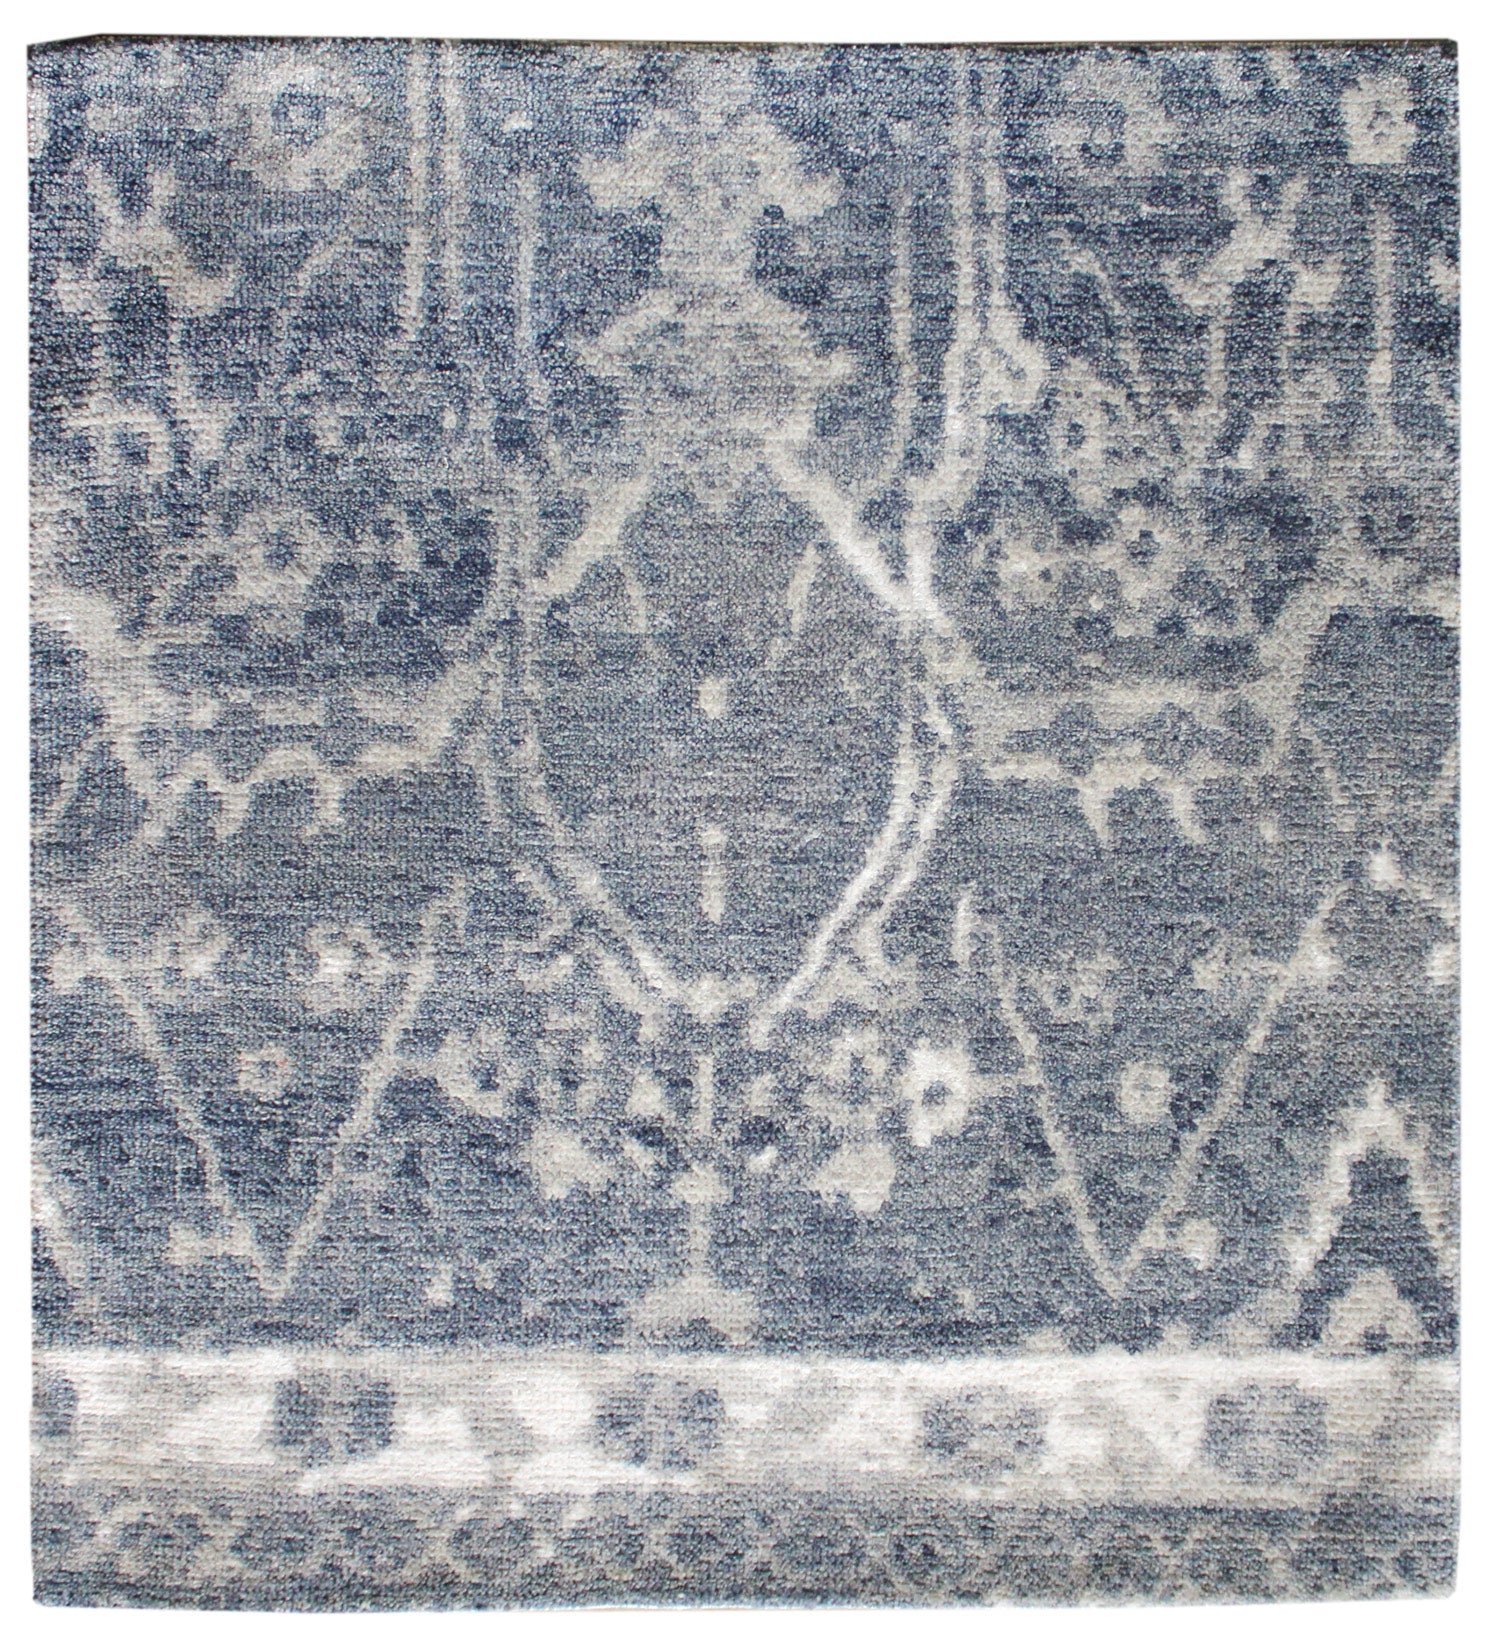 Strap Handwoven Transitional Rug